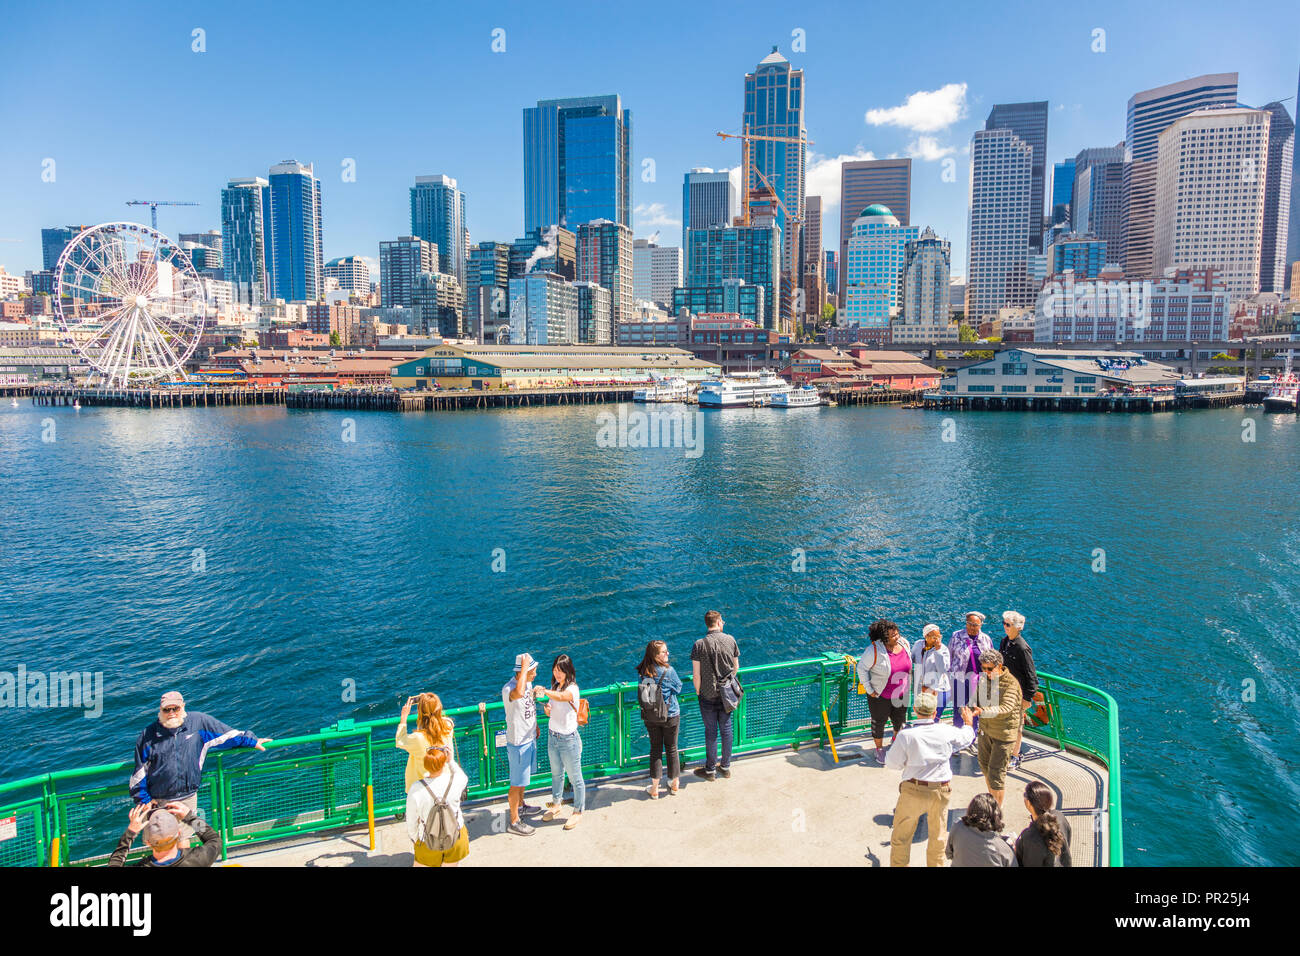 Seattle Washington city skyline with passengers in foreground on deck of passenger ferry in Puget Sound headed to Seattle Washington Stock Photo